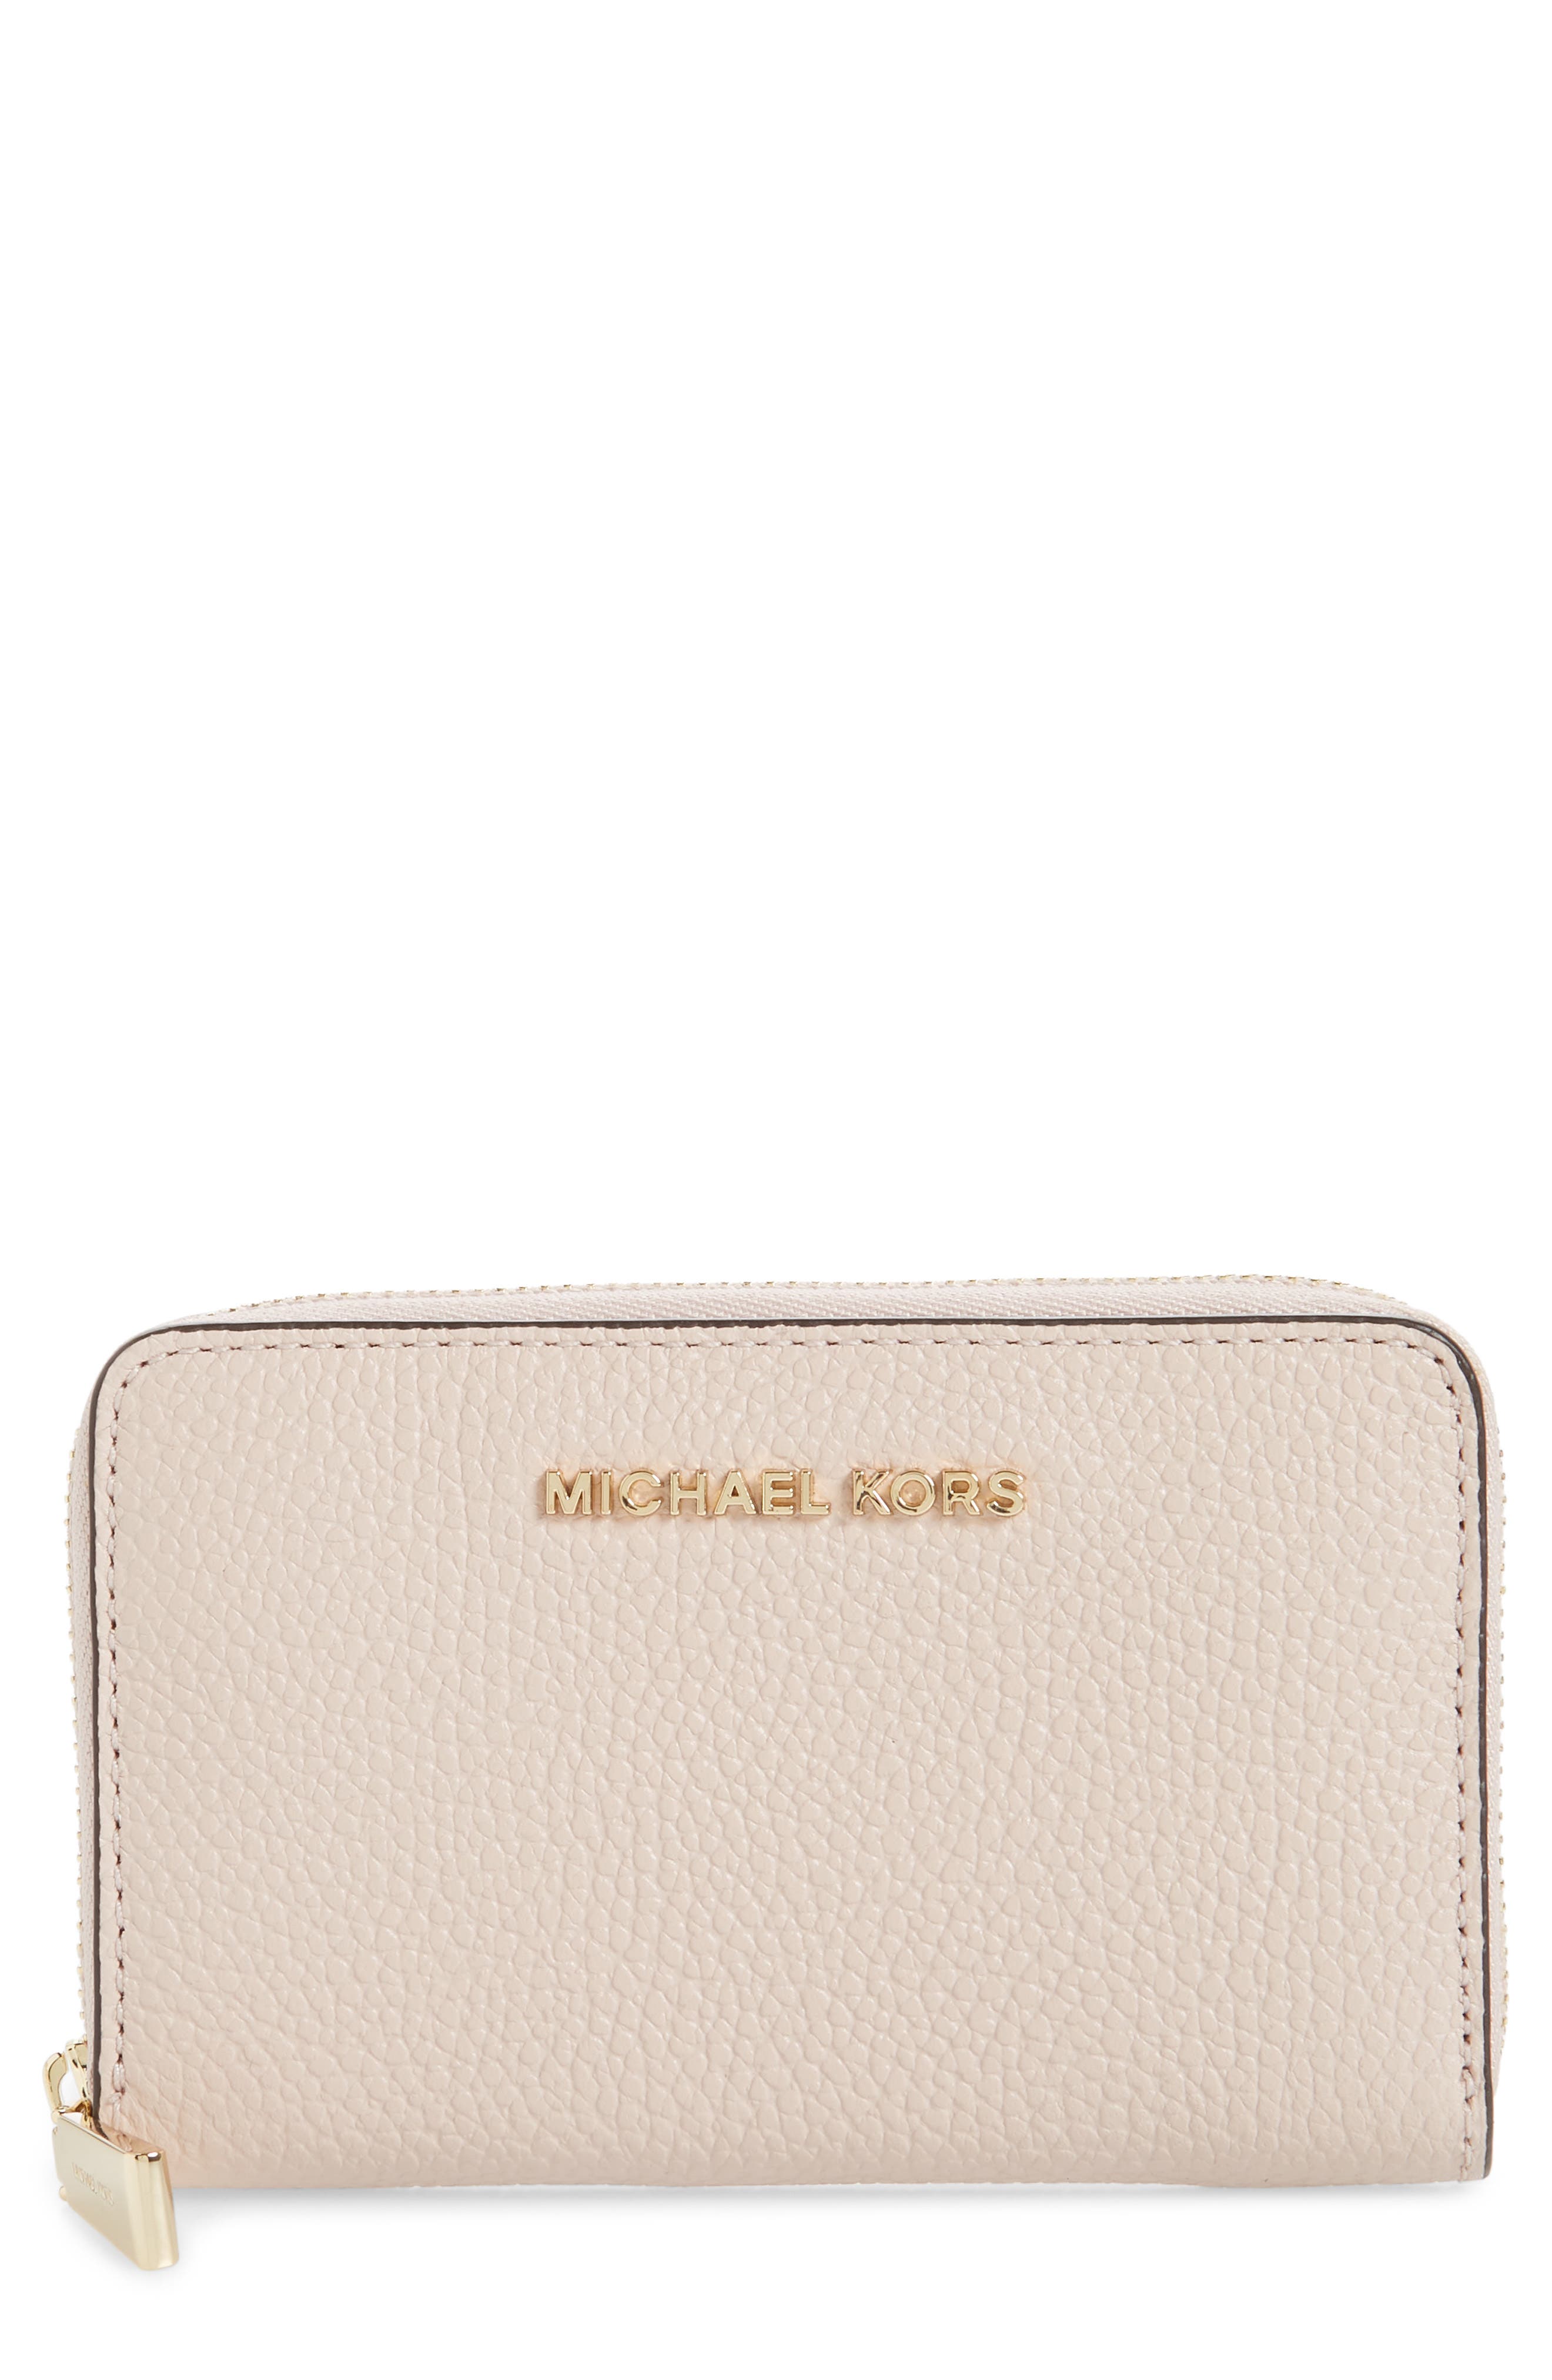 UPC 193599038810 product image for Women's Michael Michael Kors Small Za Leather Wallet - Pink | upcitemdb.com